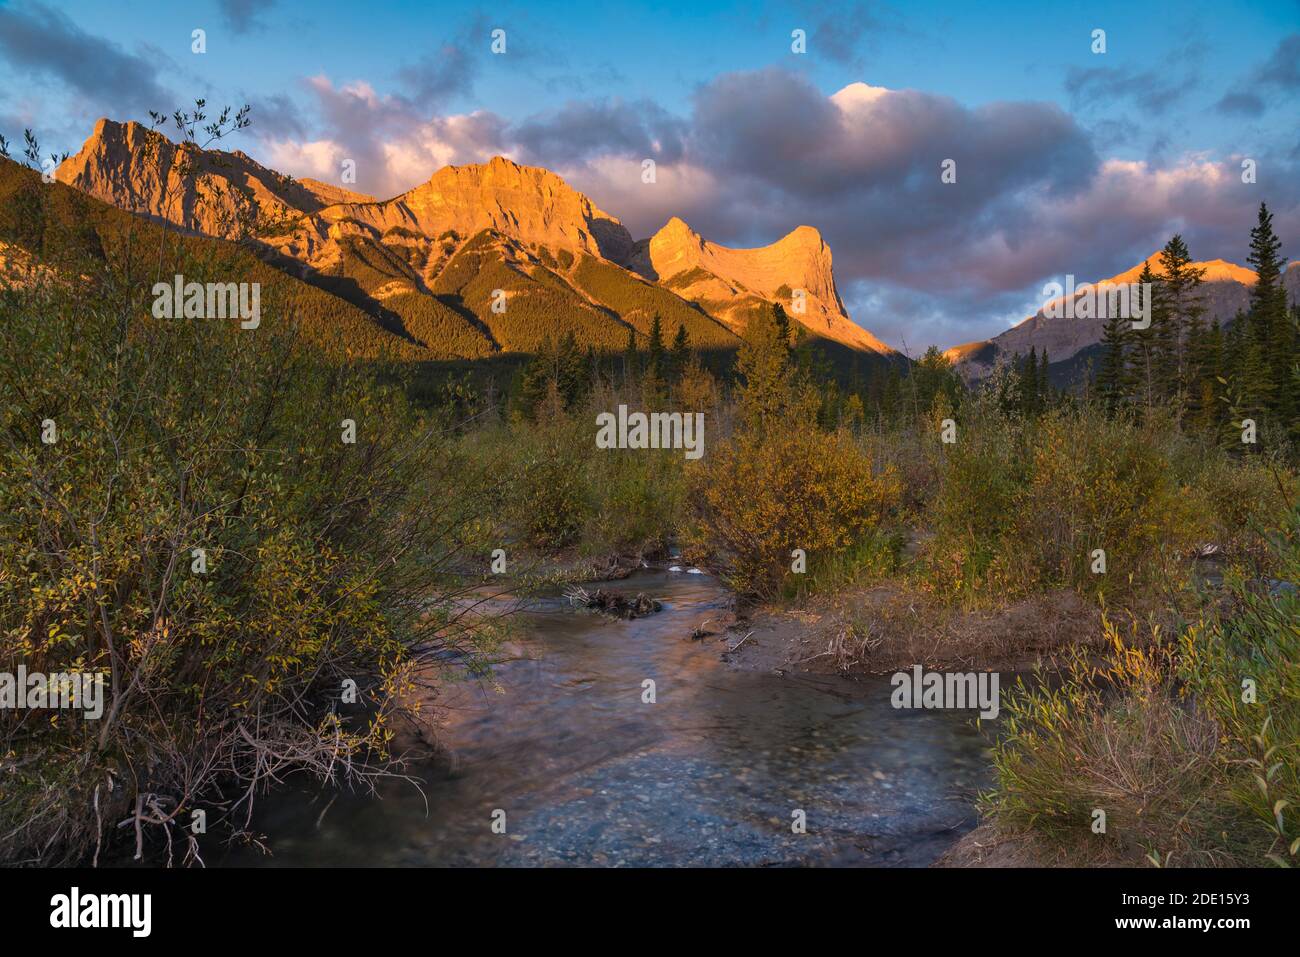 Sunrise and Alpenglow on Mount Lawrence Grassi and Ha Ling Peak in autumn, Canmore, Alberta, Canadian Rockies, Canada, North America Stock Photo